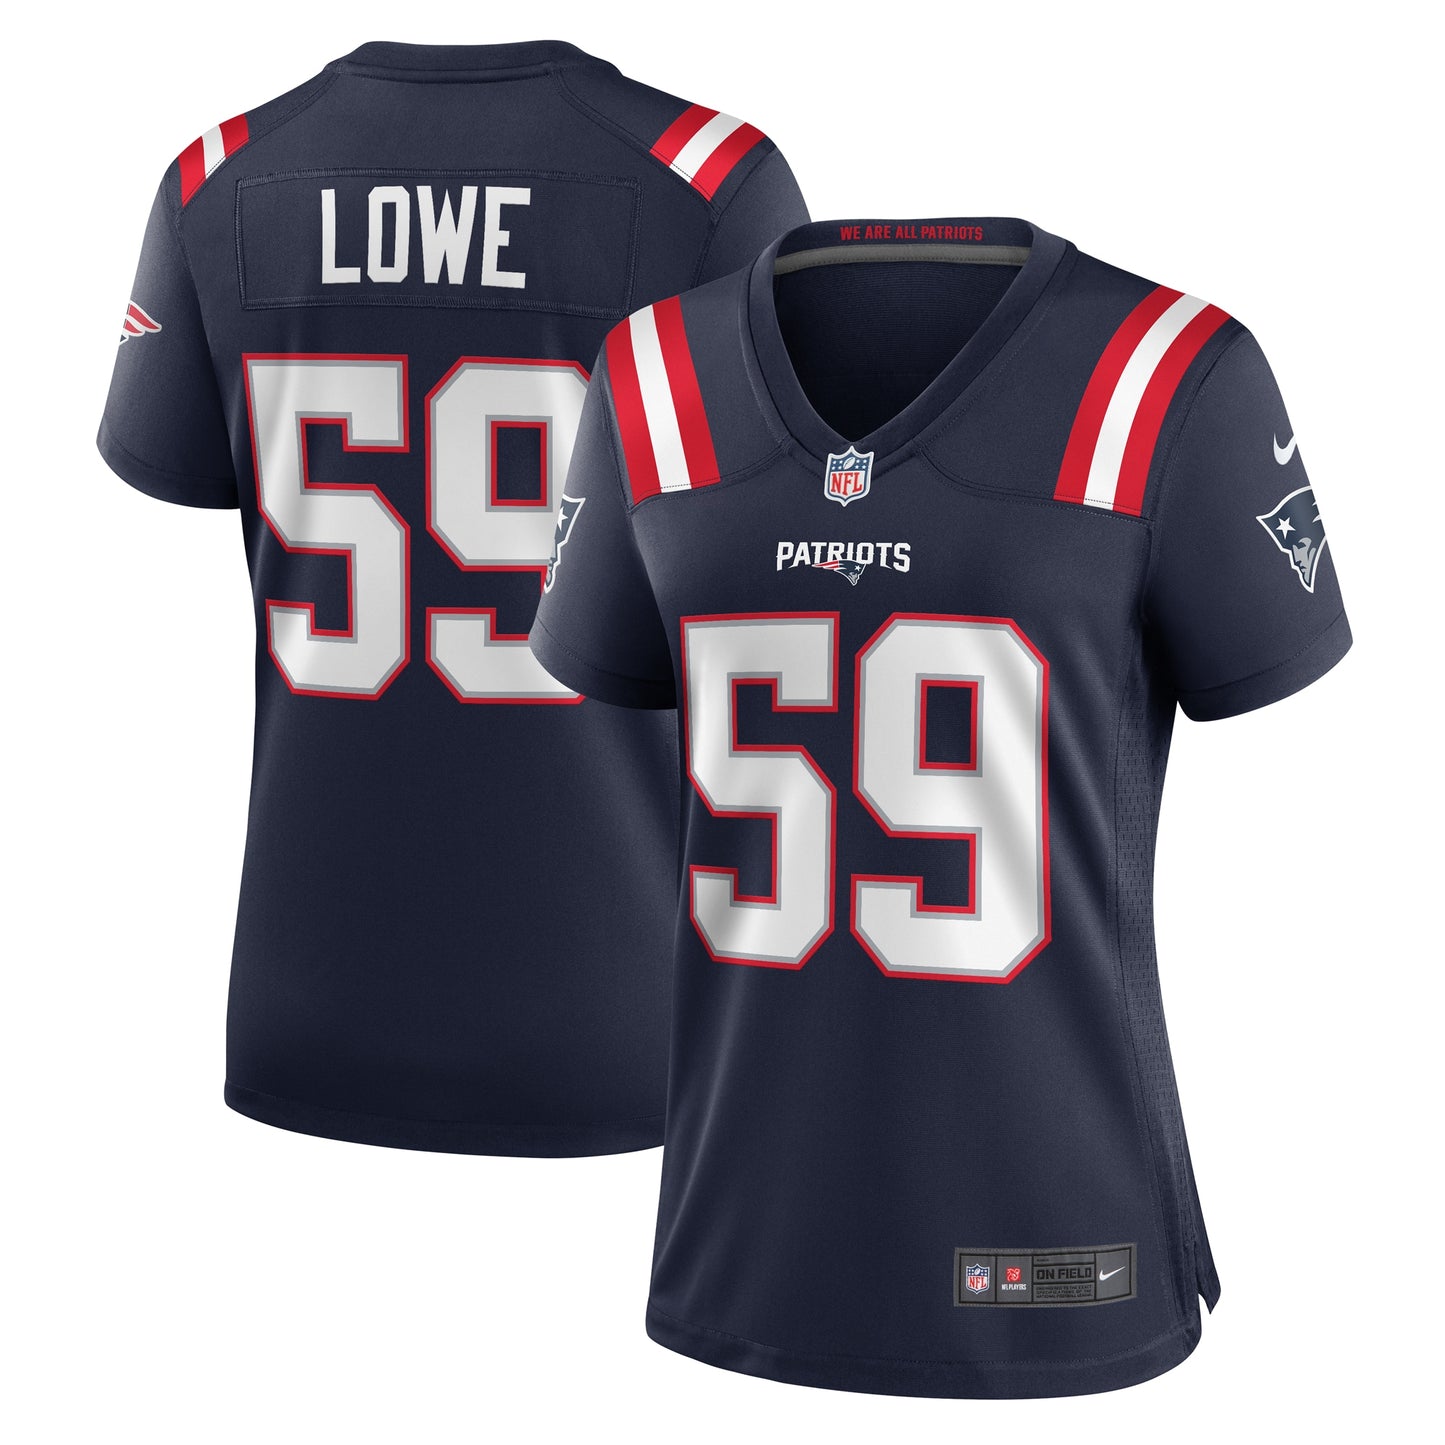 Vederian Lowe New England Patriots Nike Women's Team Game Jersey - Navy